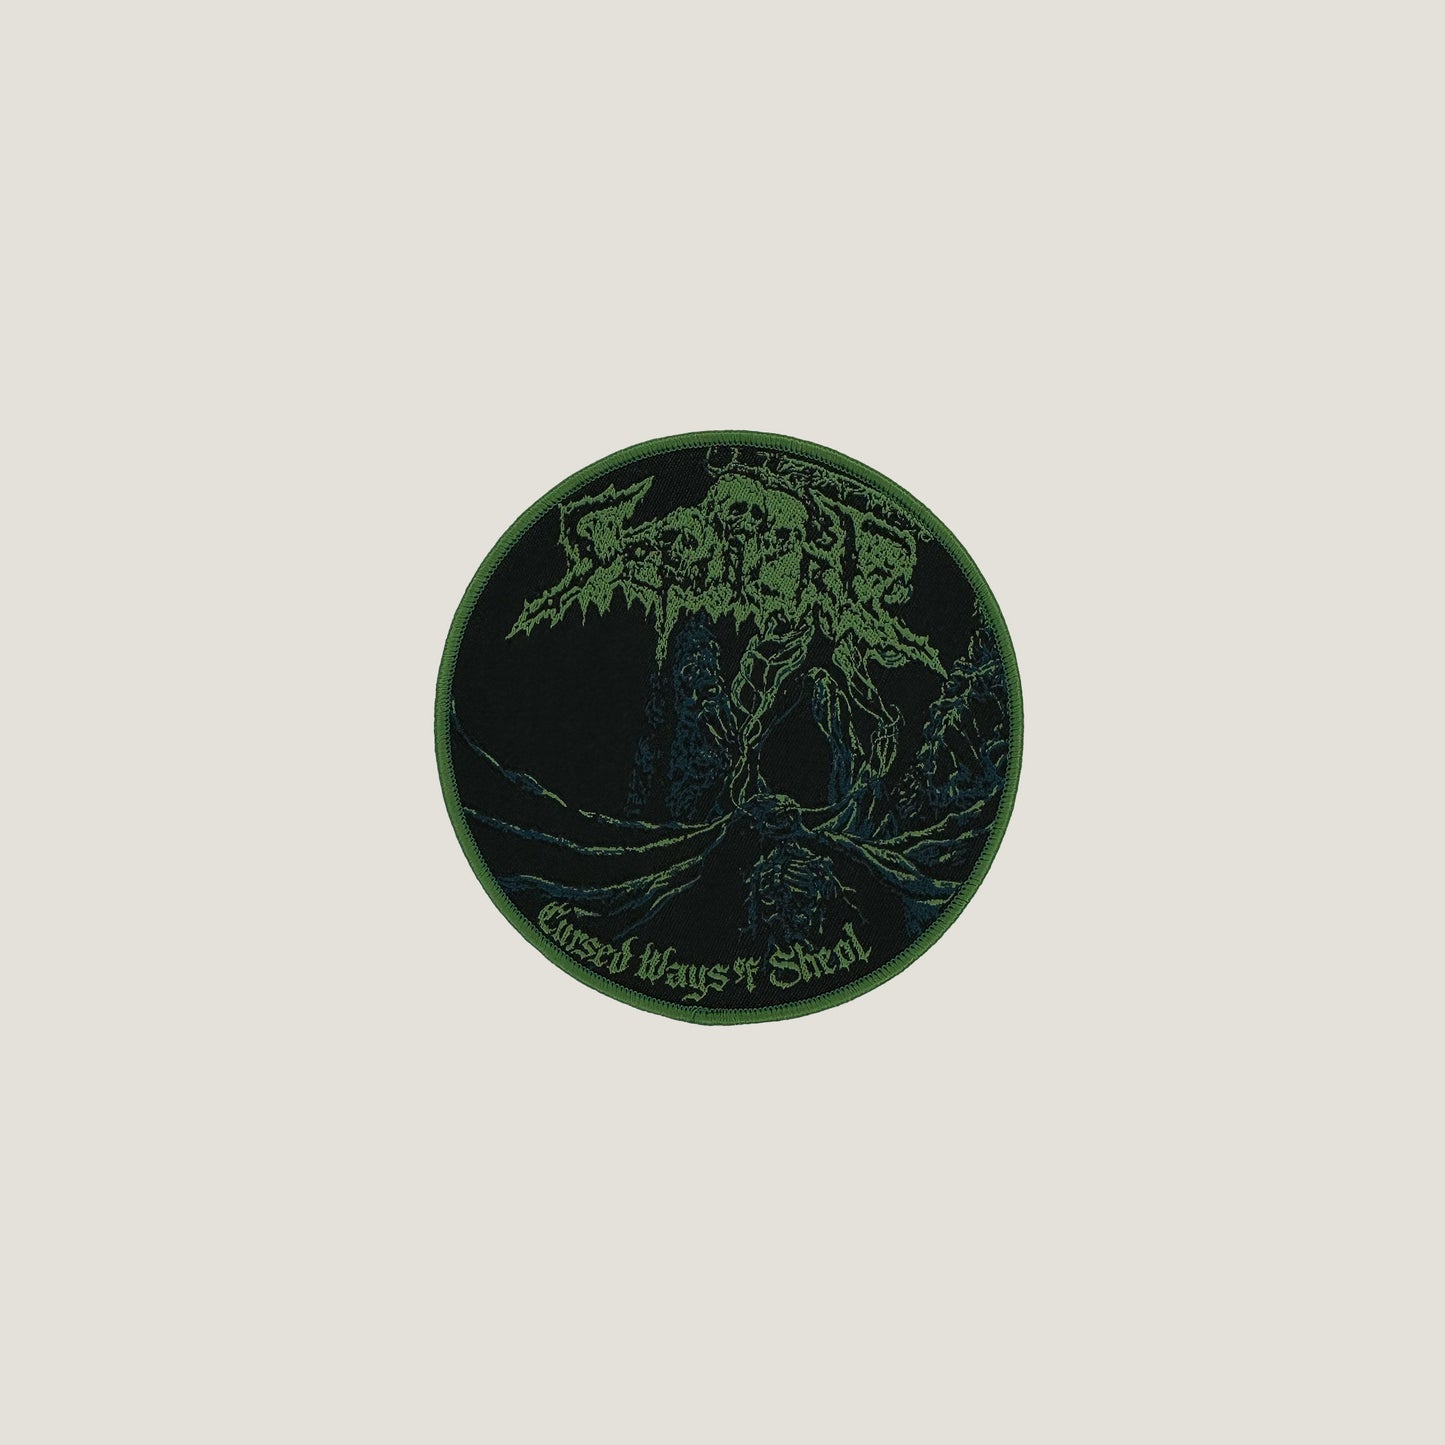 Temporal Dimensions Patches Sepulcre Cursed Ways of Sheol Green Border Woven Patch